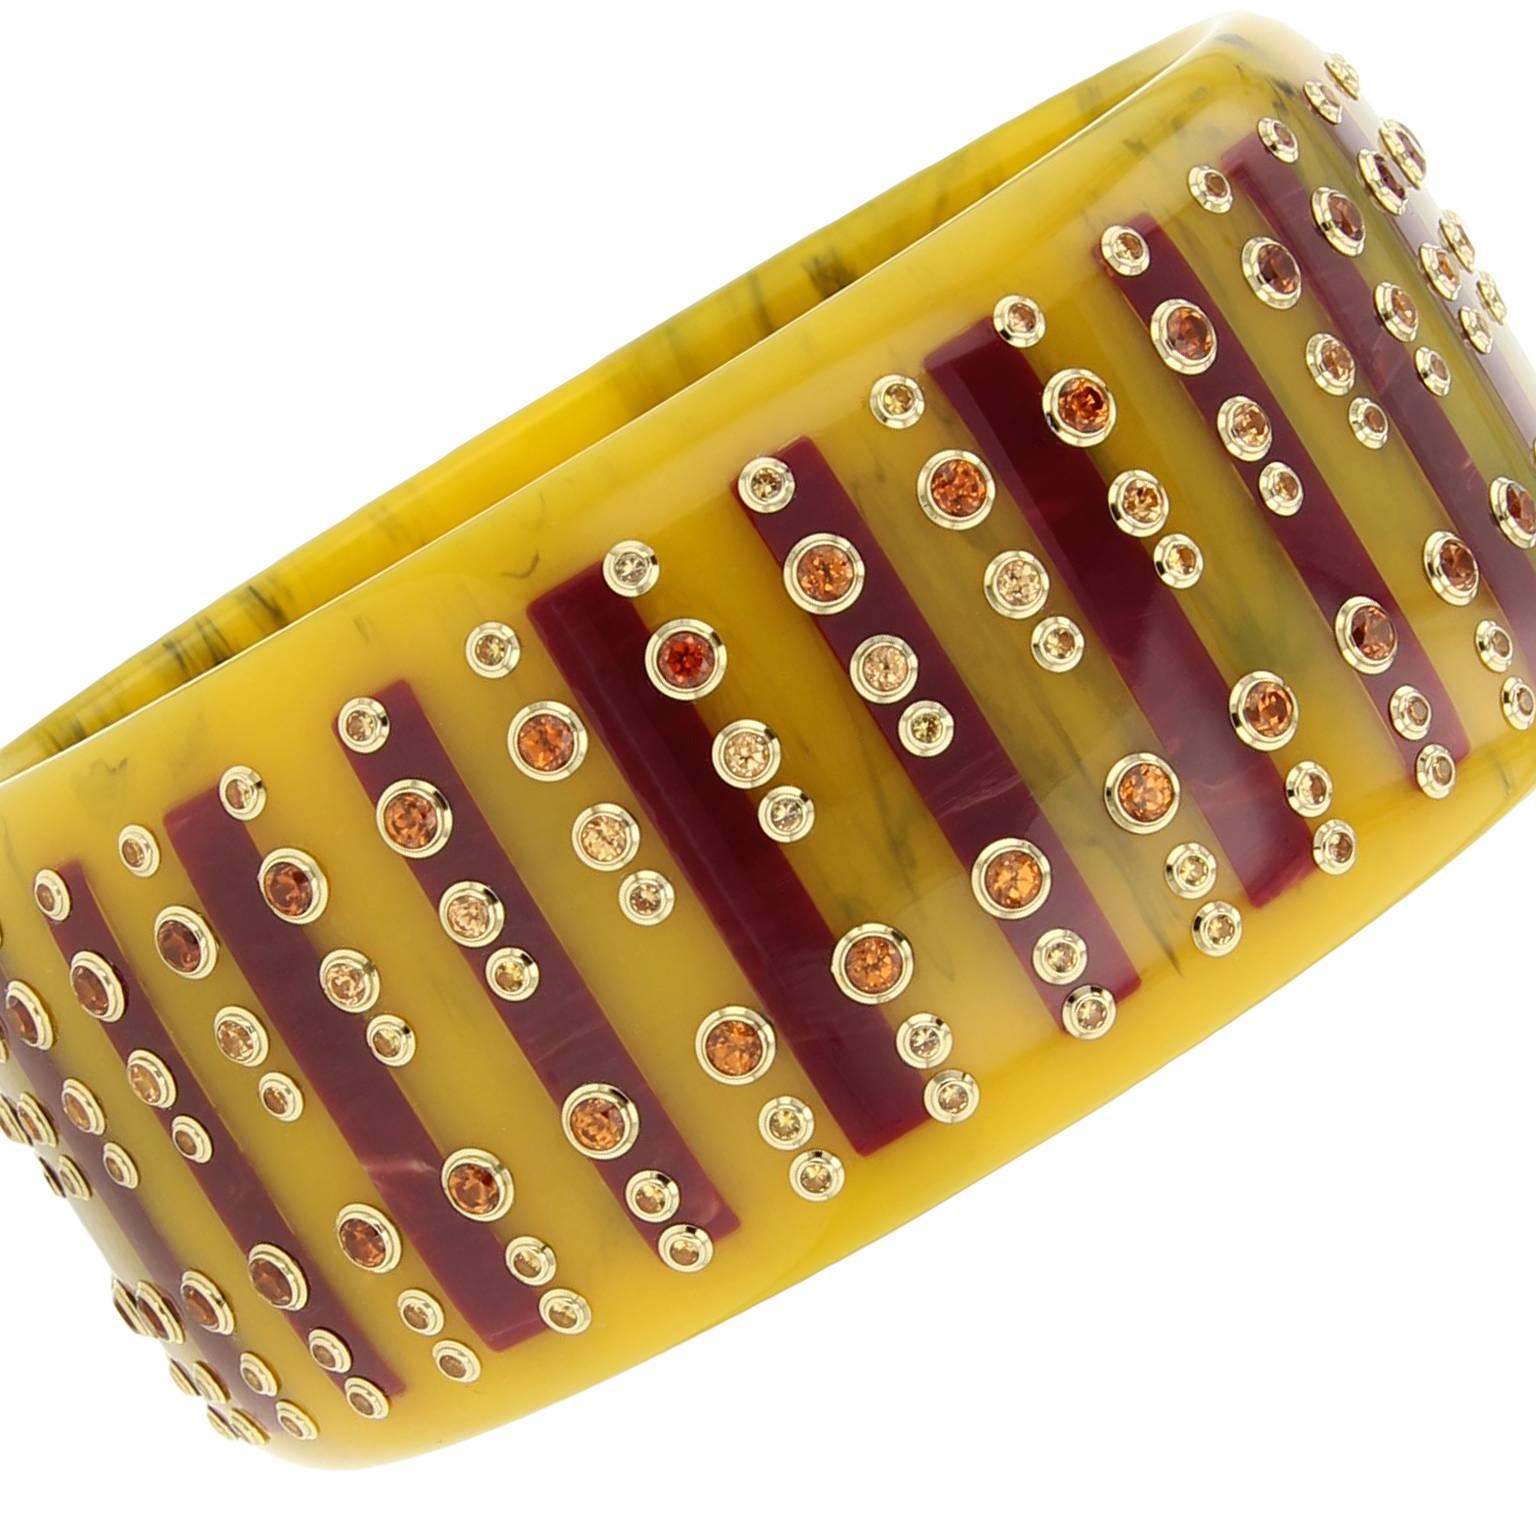 This Mark Davis bangle was handcrafted using mustard yellow and burgundy vintage bakelite. The inlaid elongated rectangles are studded with garnet and yellow sapphire set in 18k yellow gold bezels.

Full details below: 
• From the Mark Davis